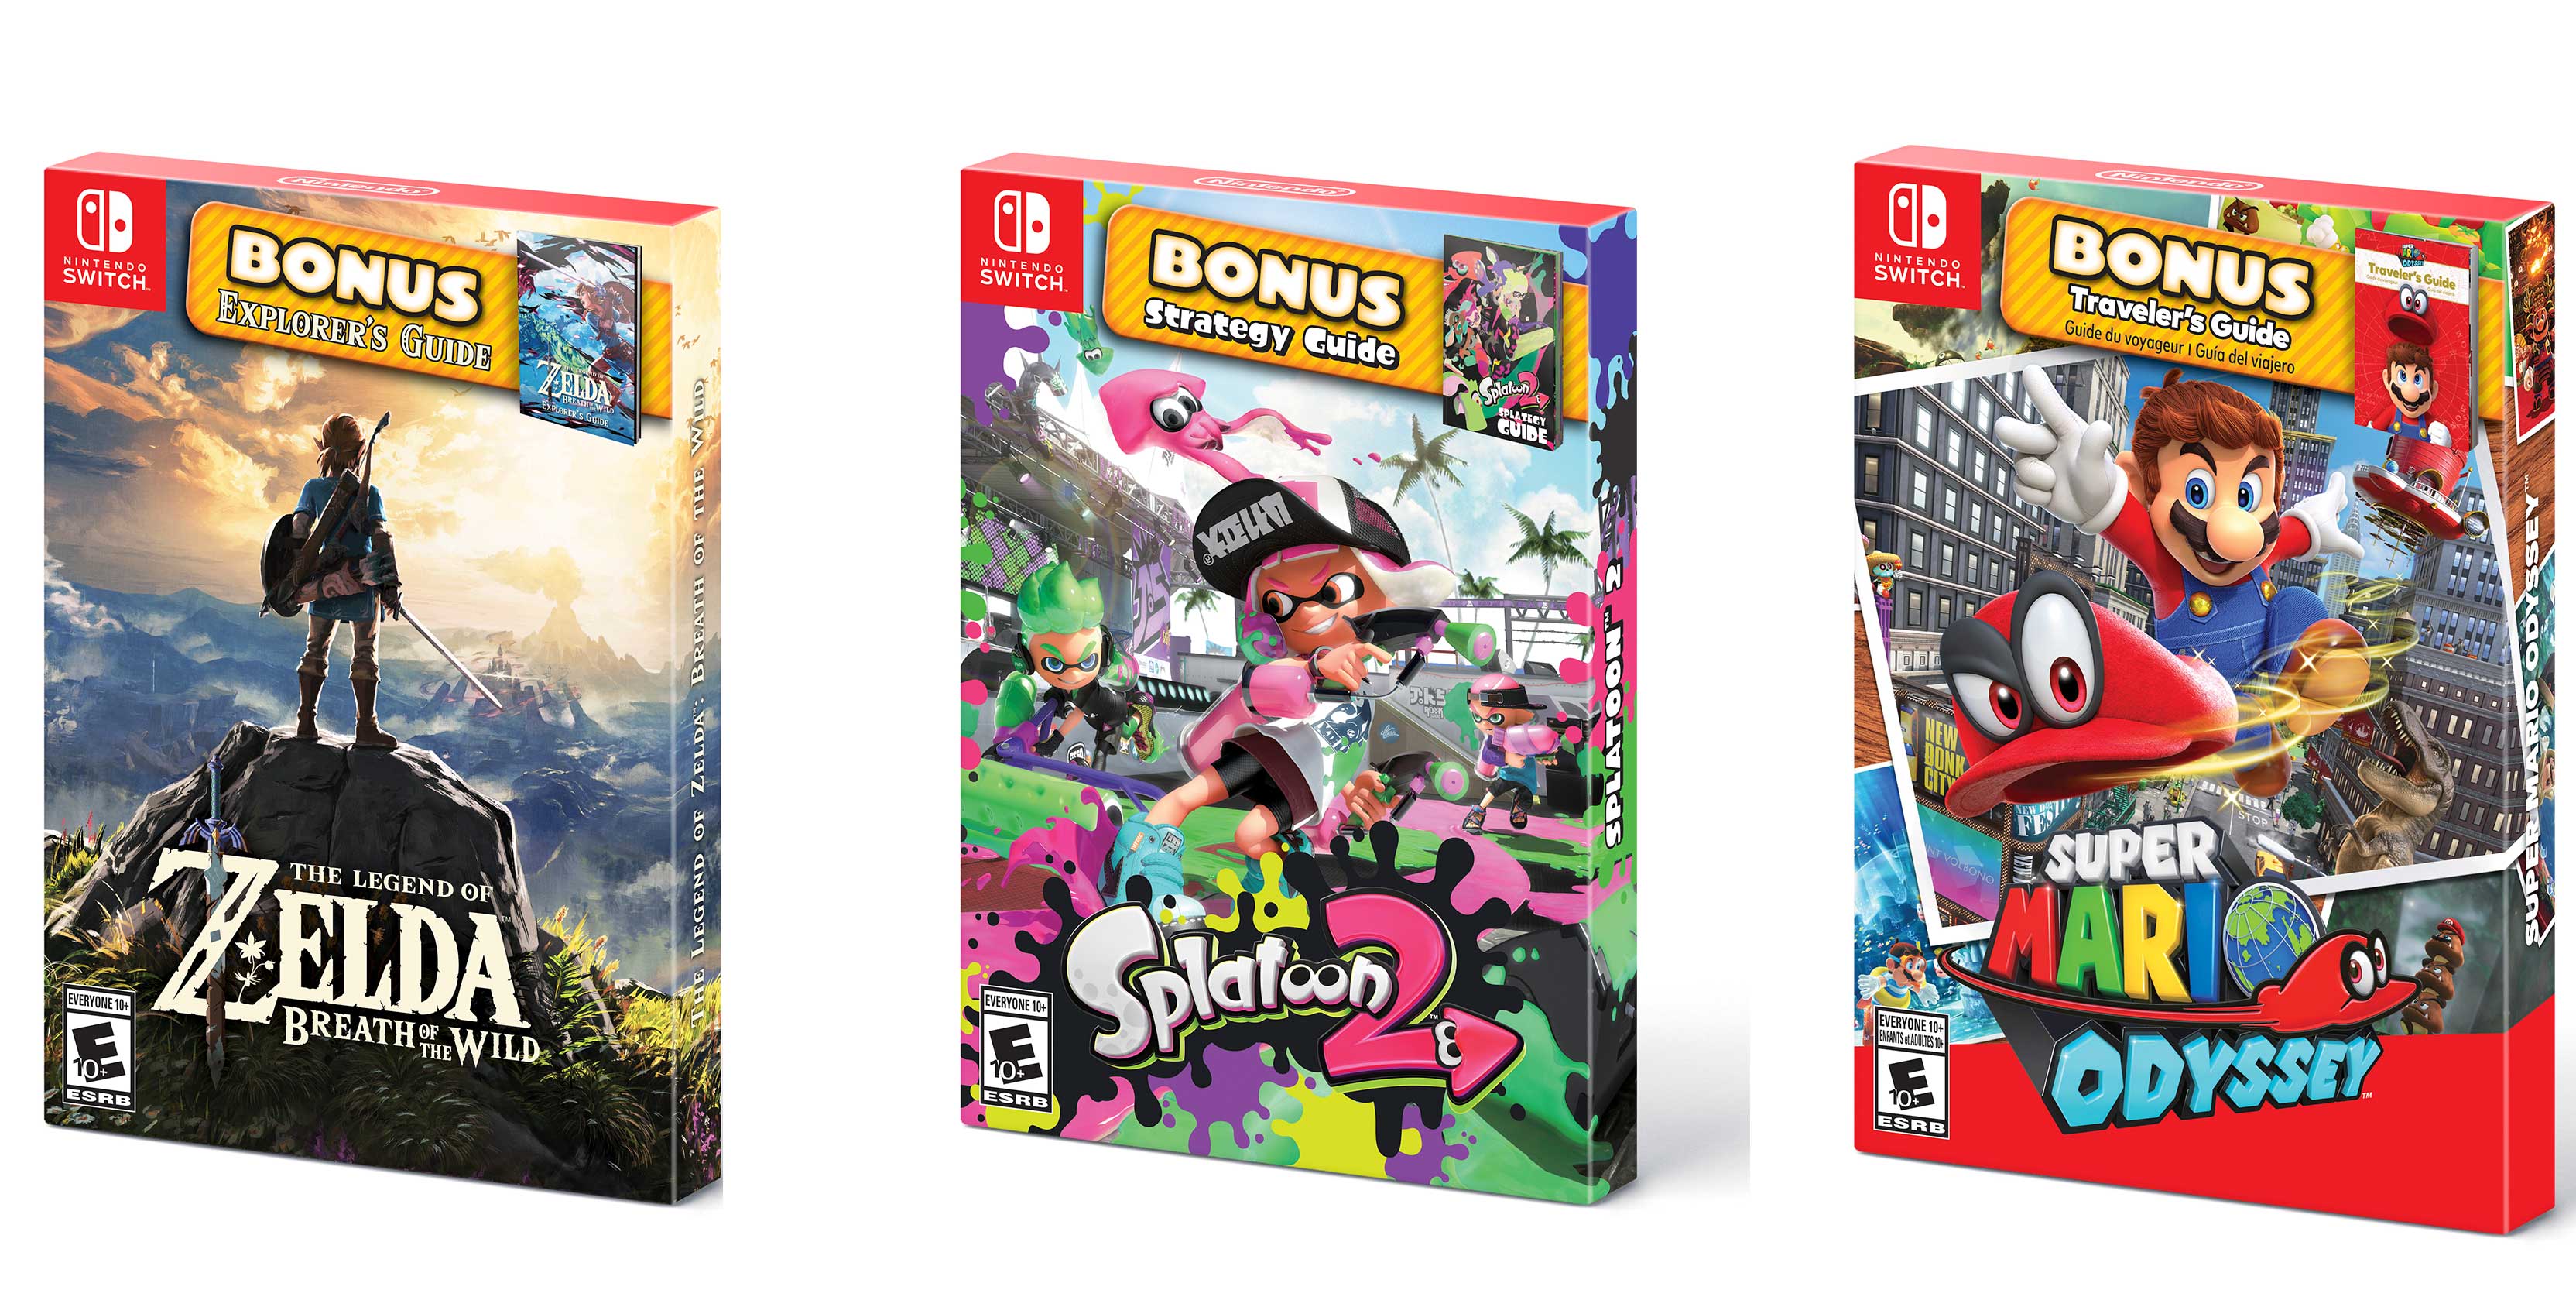 Nintendo launches Switch game bundles that physical strategy guides